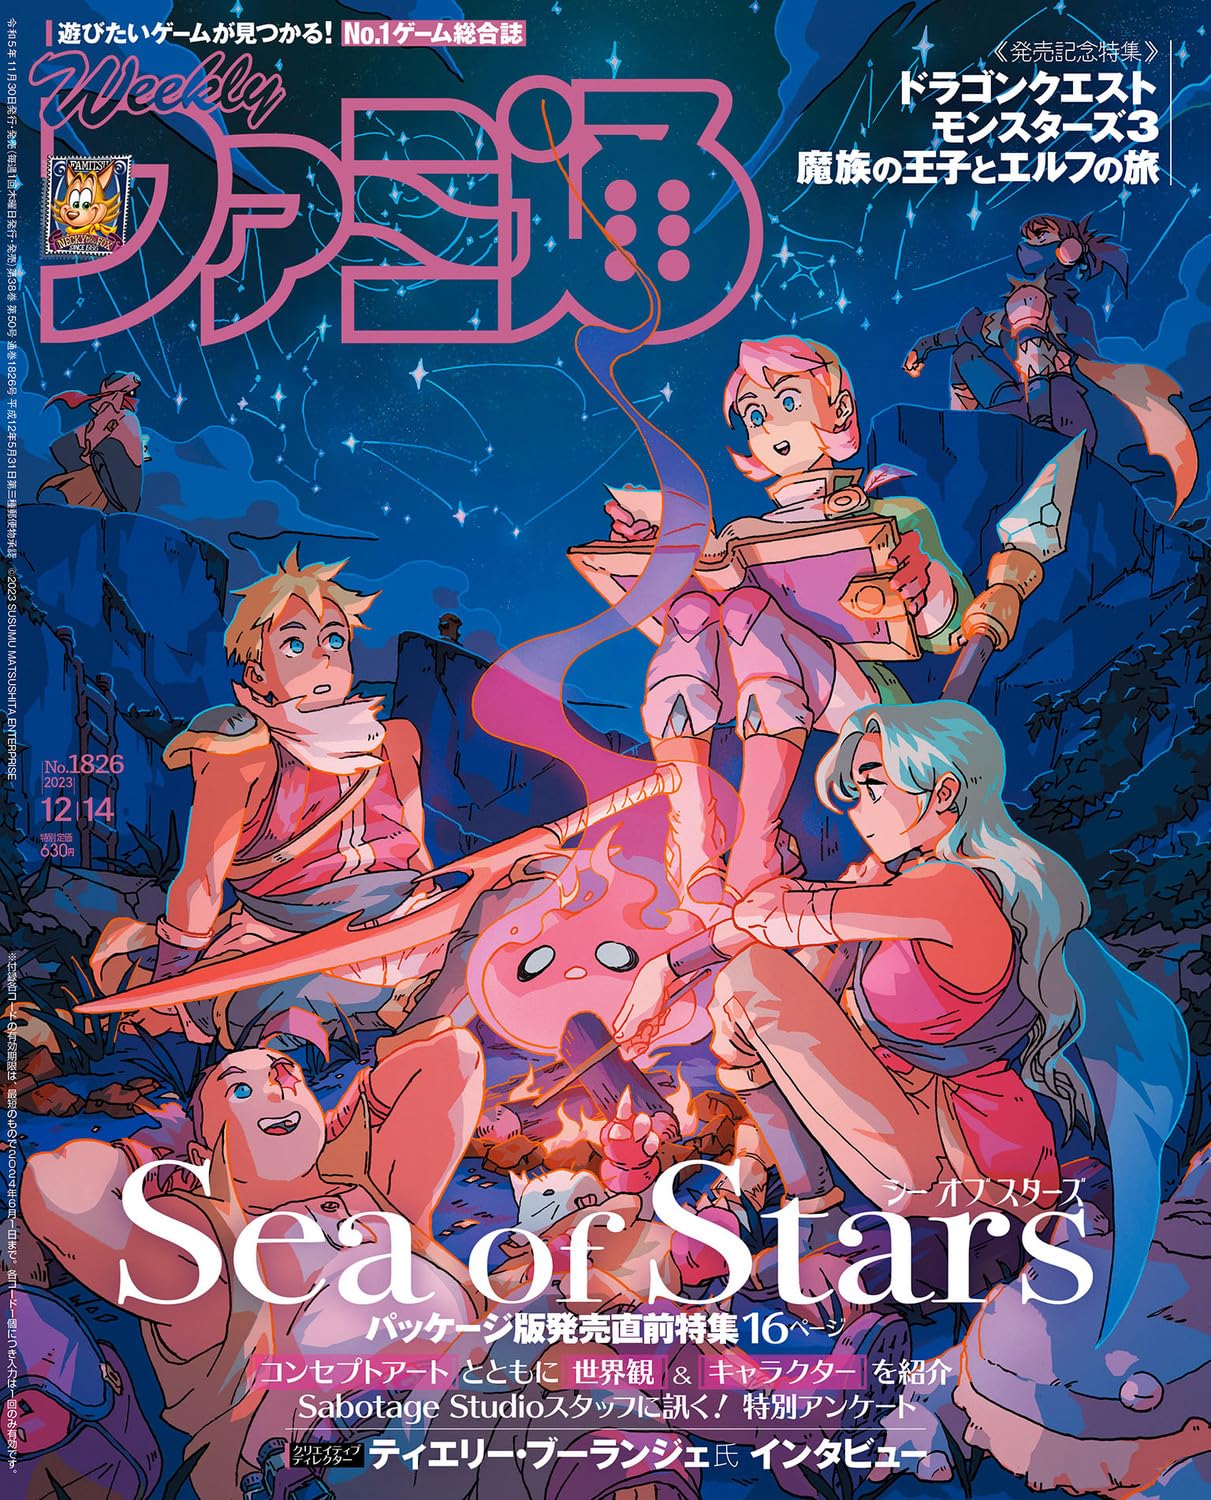 Sea of Stars Featured in Weekly Famitsu; New Art